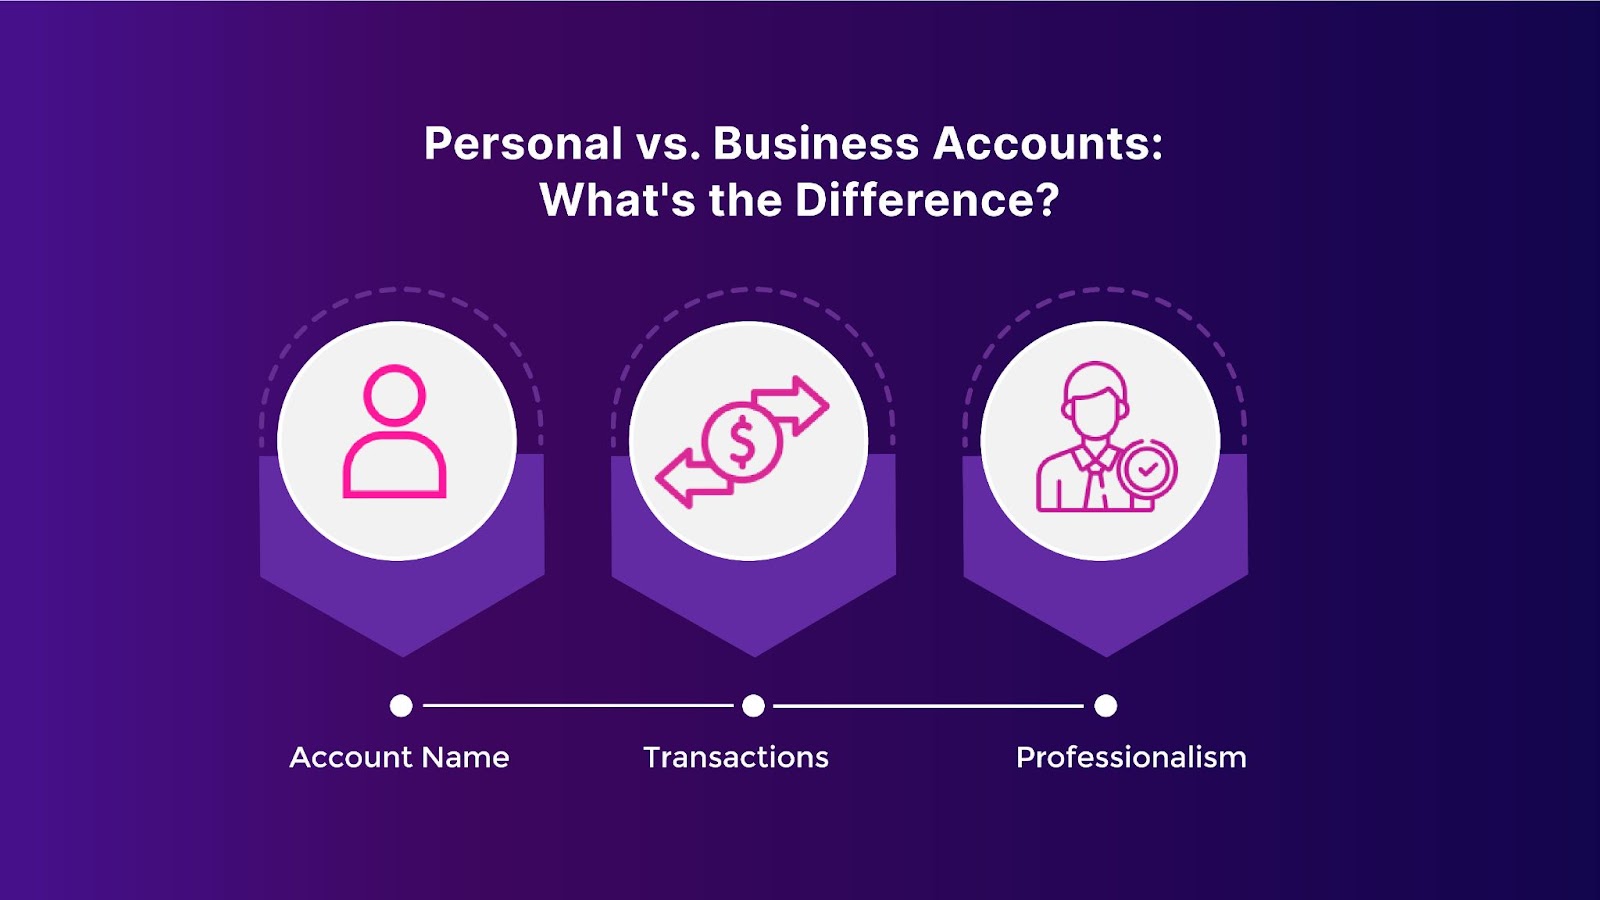 Differences between personal and business accounts